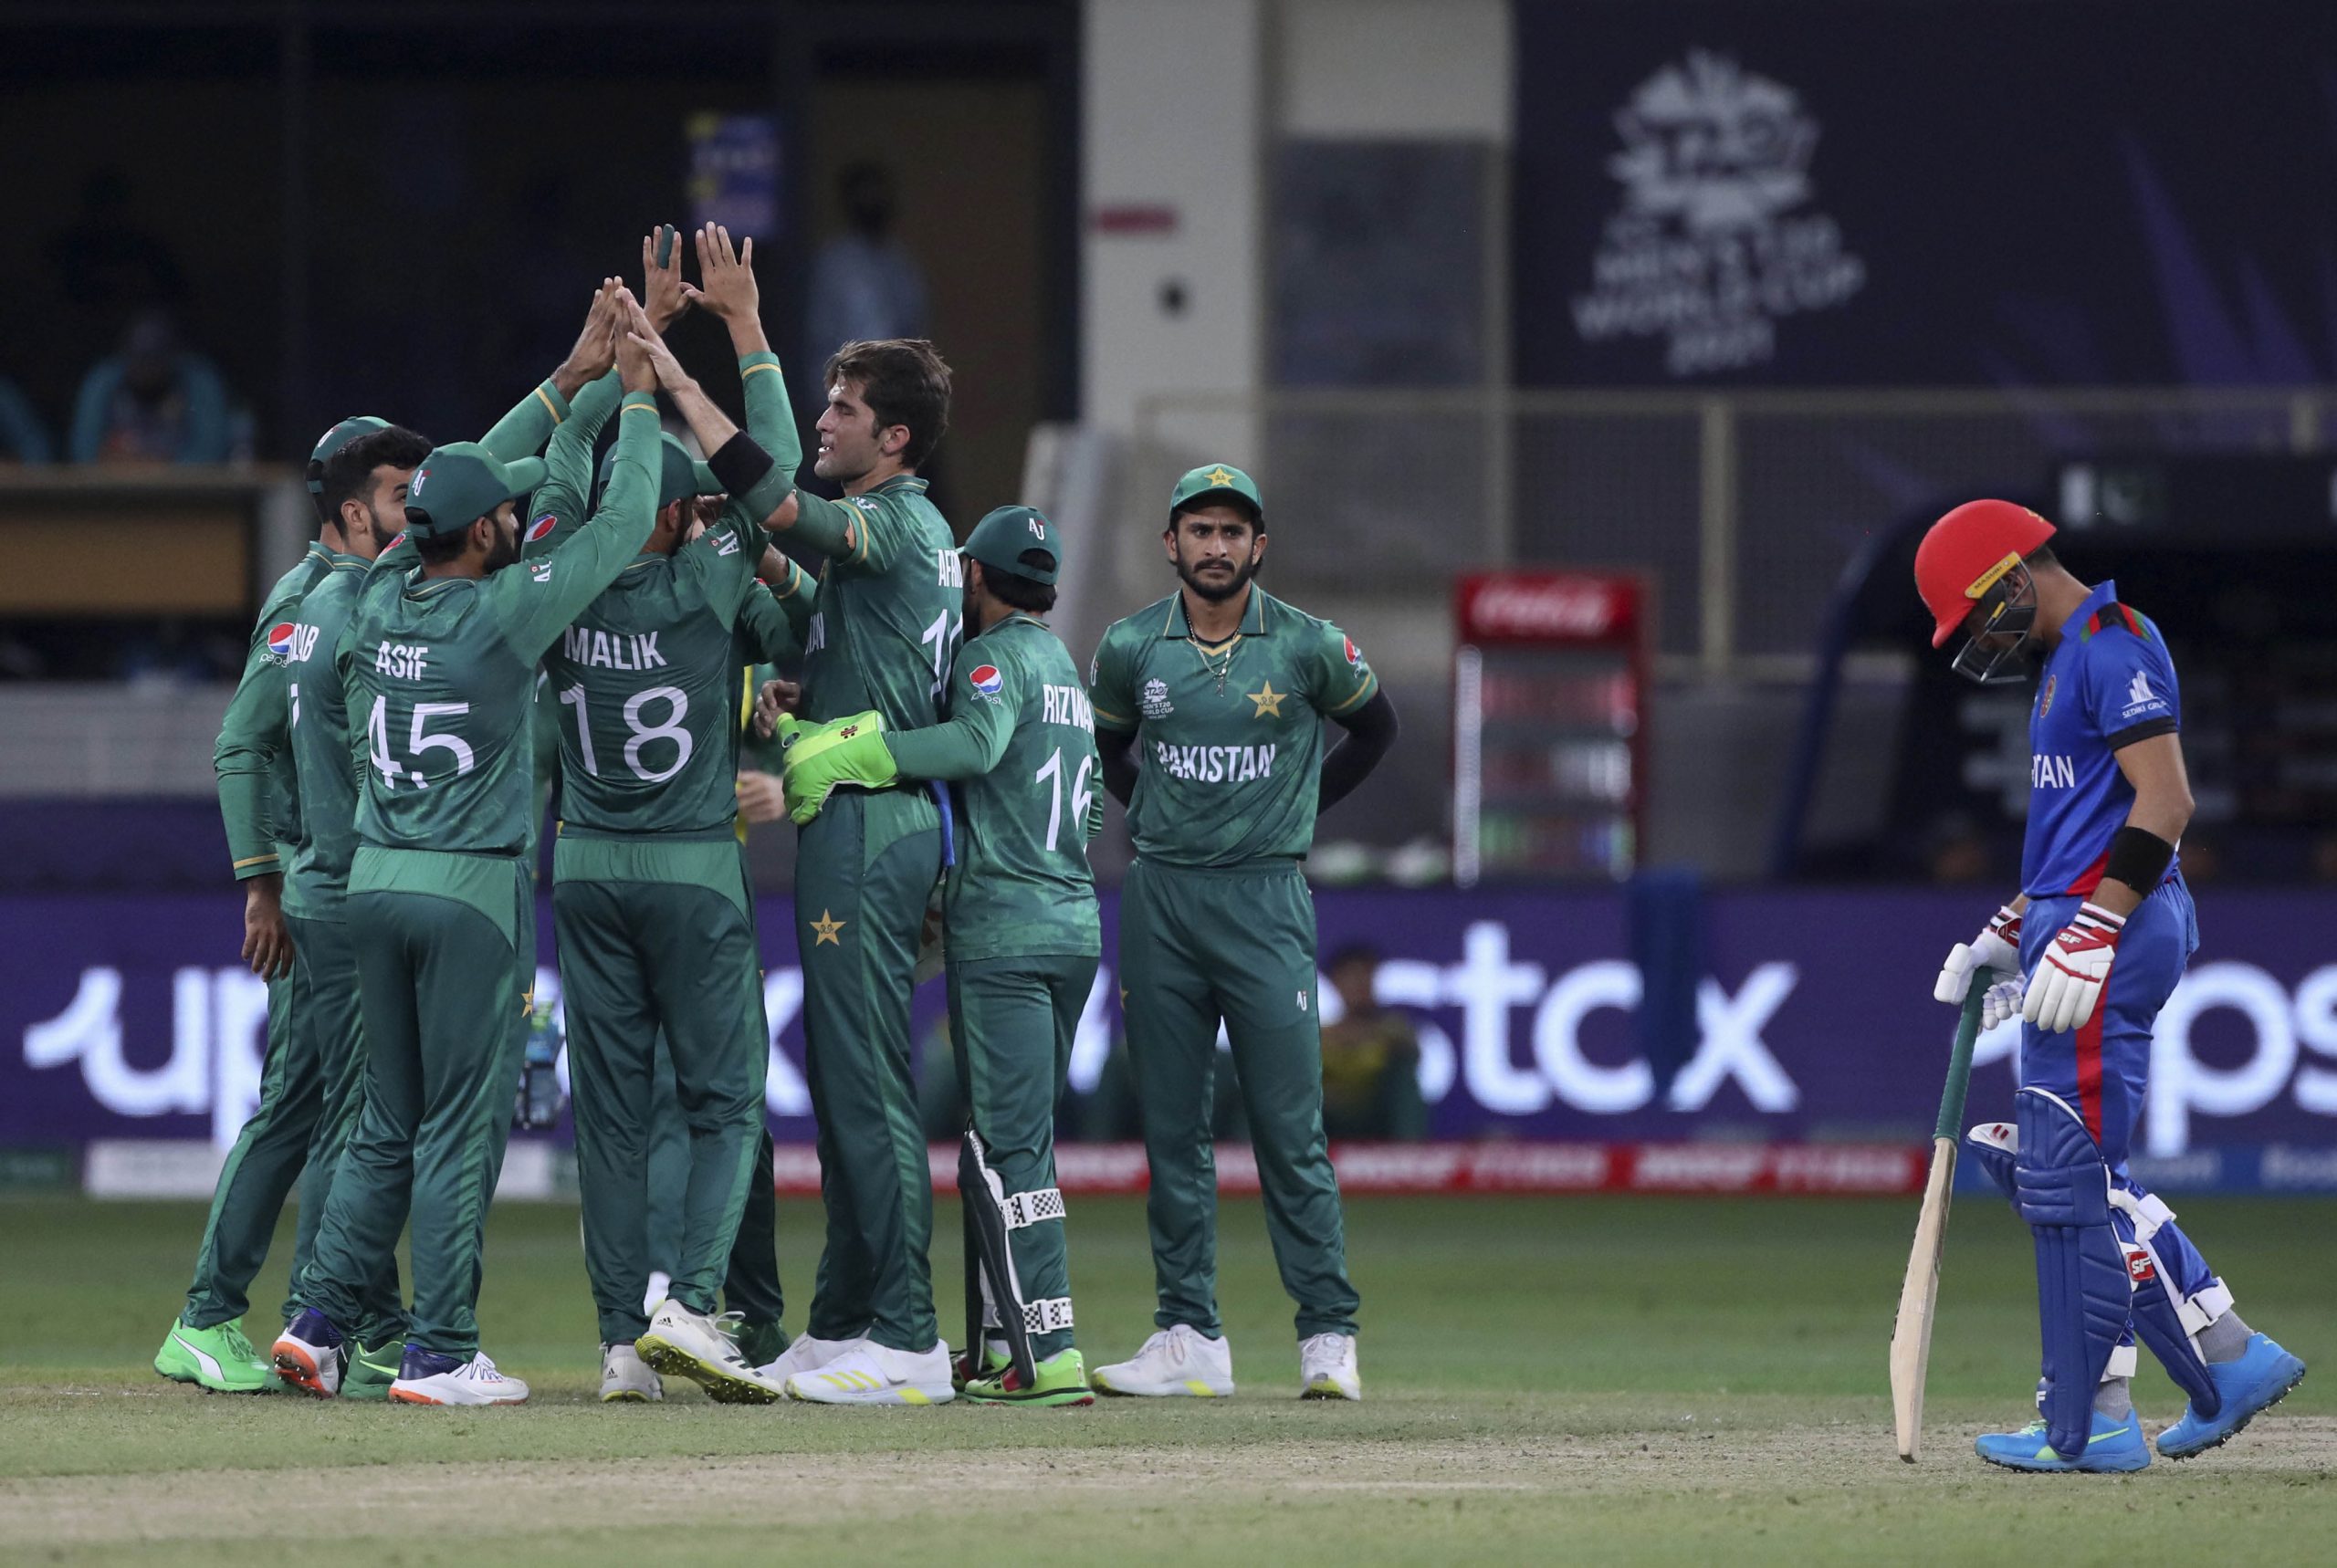 T20 World Cup: Pakistan take on Scotland in their final group stage encounter